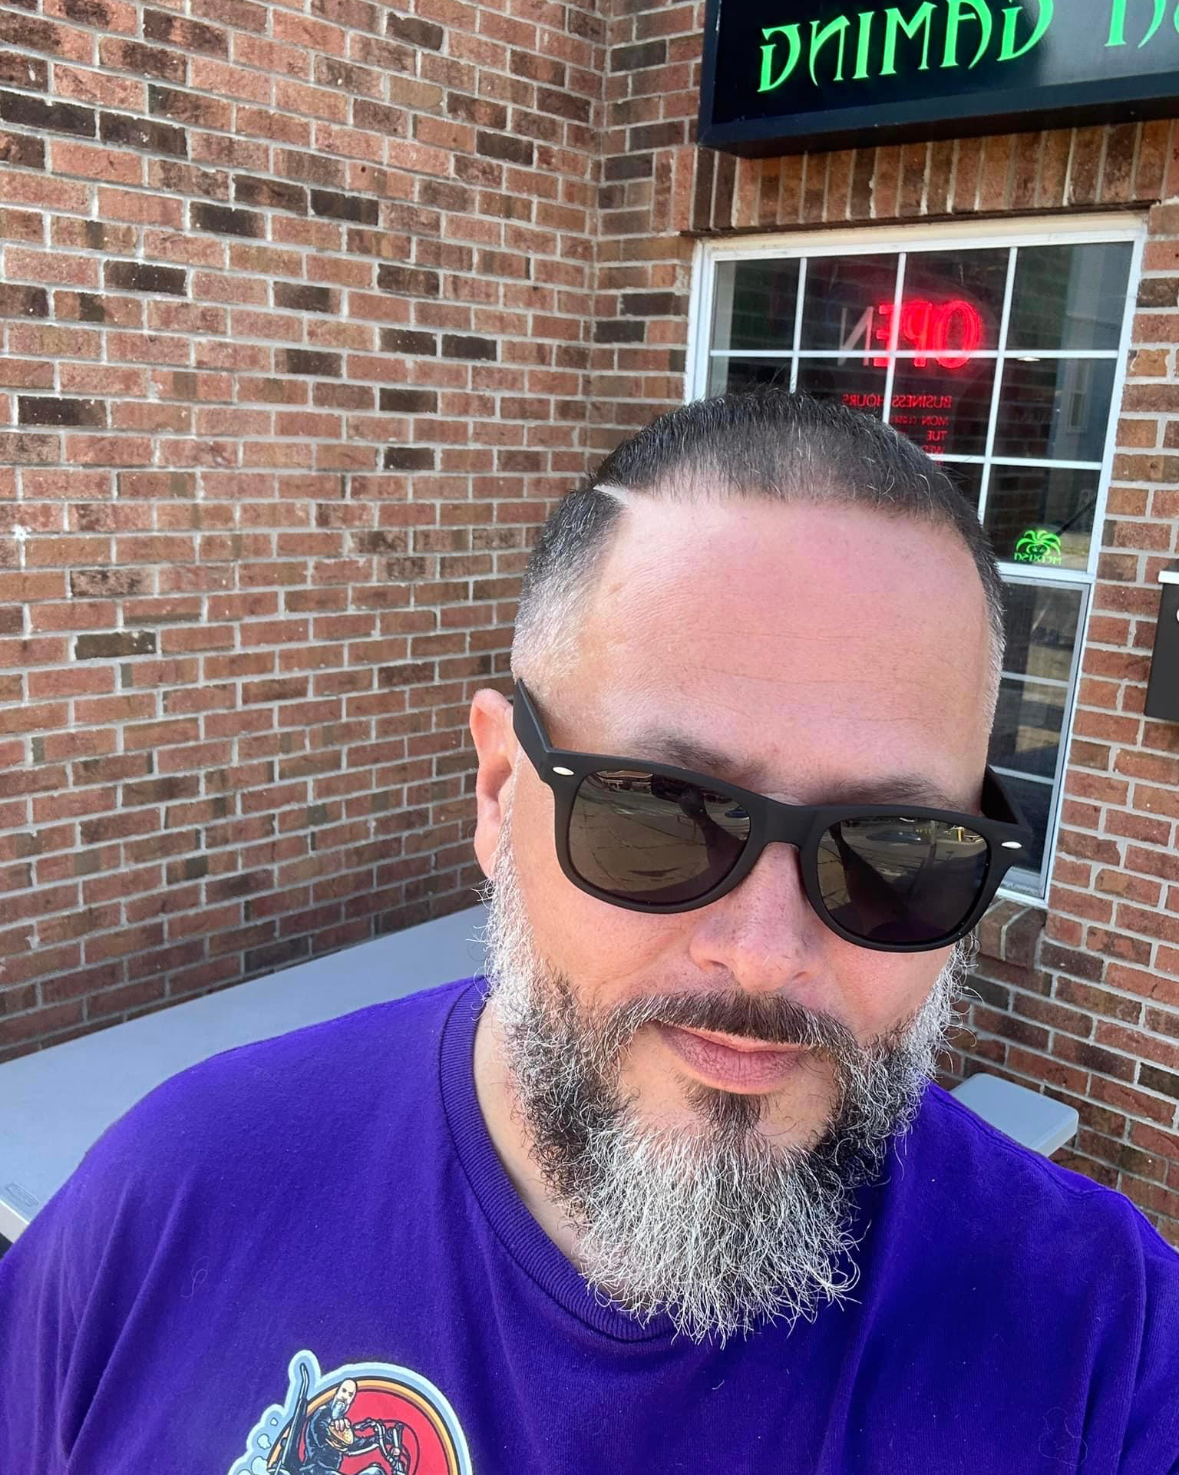 a man with a beard wearing sunglasses and a purple shirt is standing in front of a brick building .